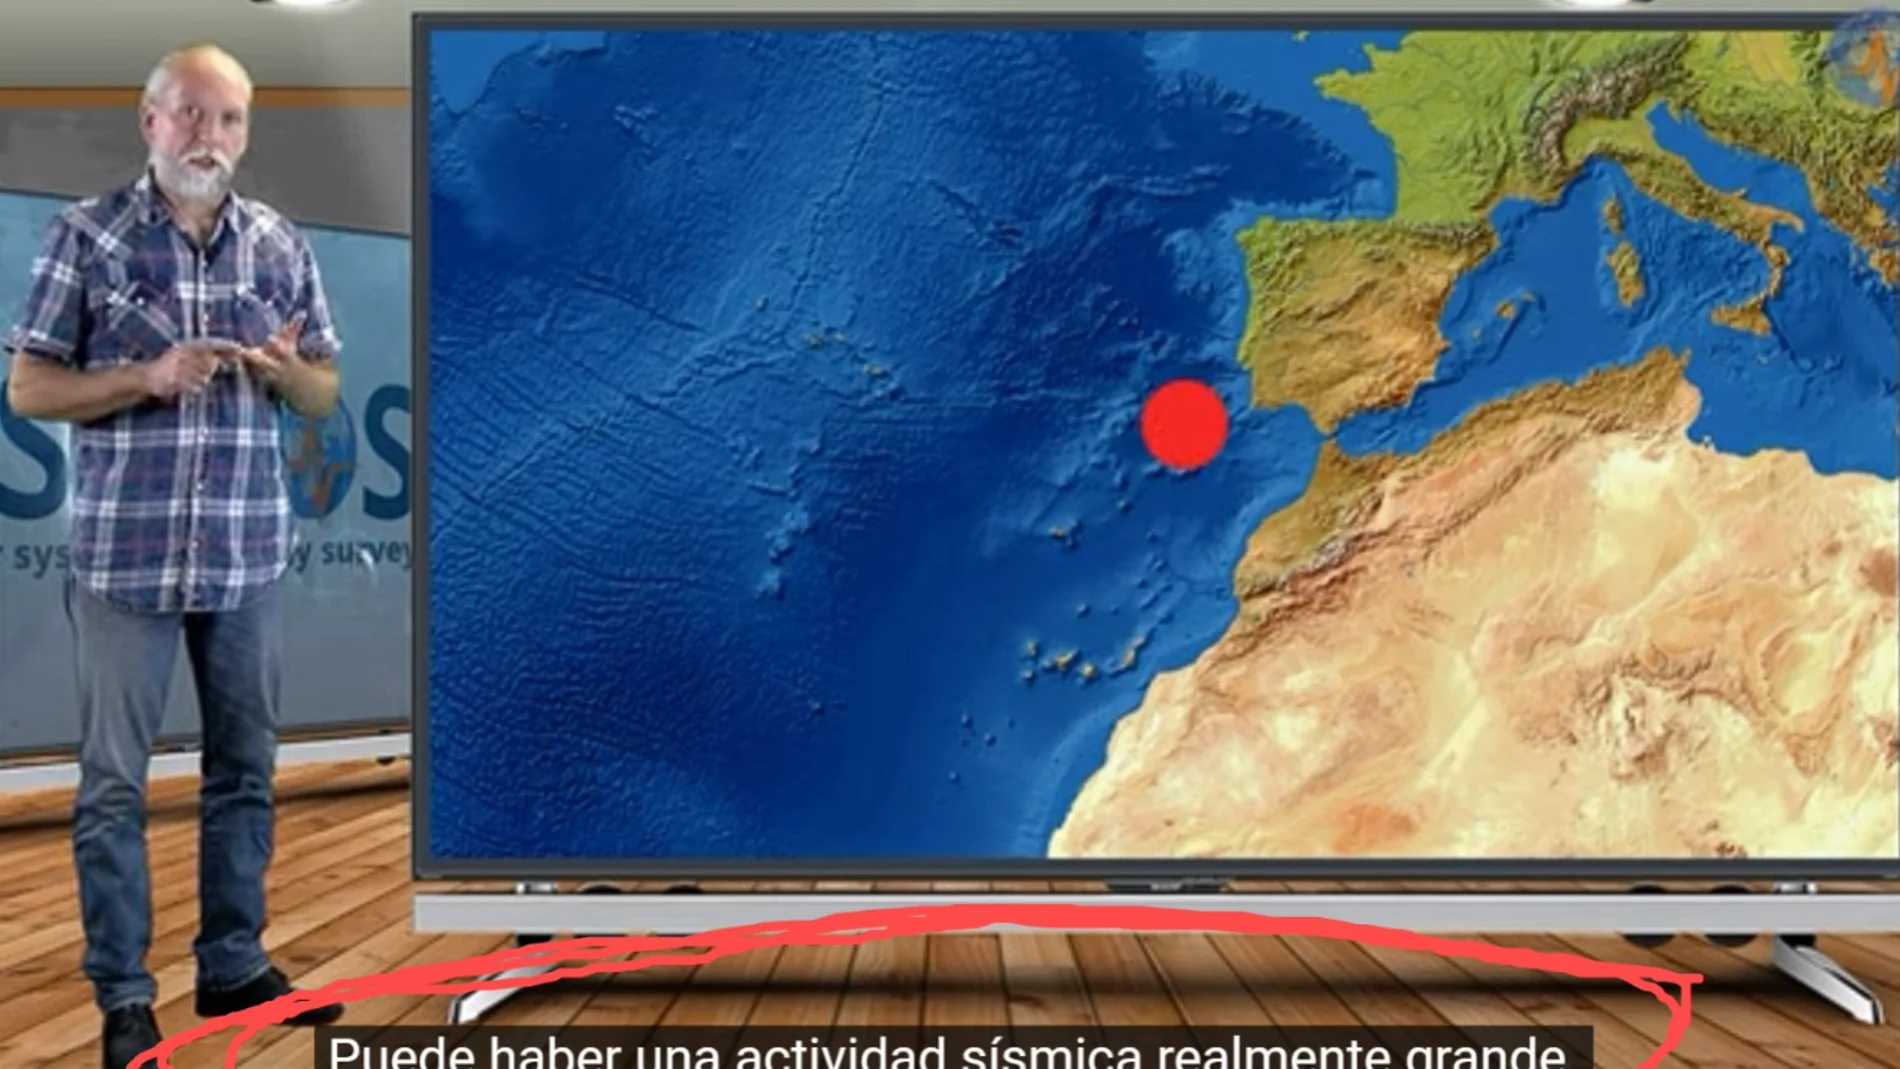 Seismologist who “predicted” the earthquake in Turkey warns Spain and Portugal